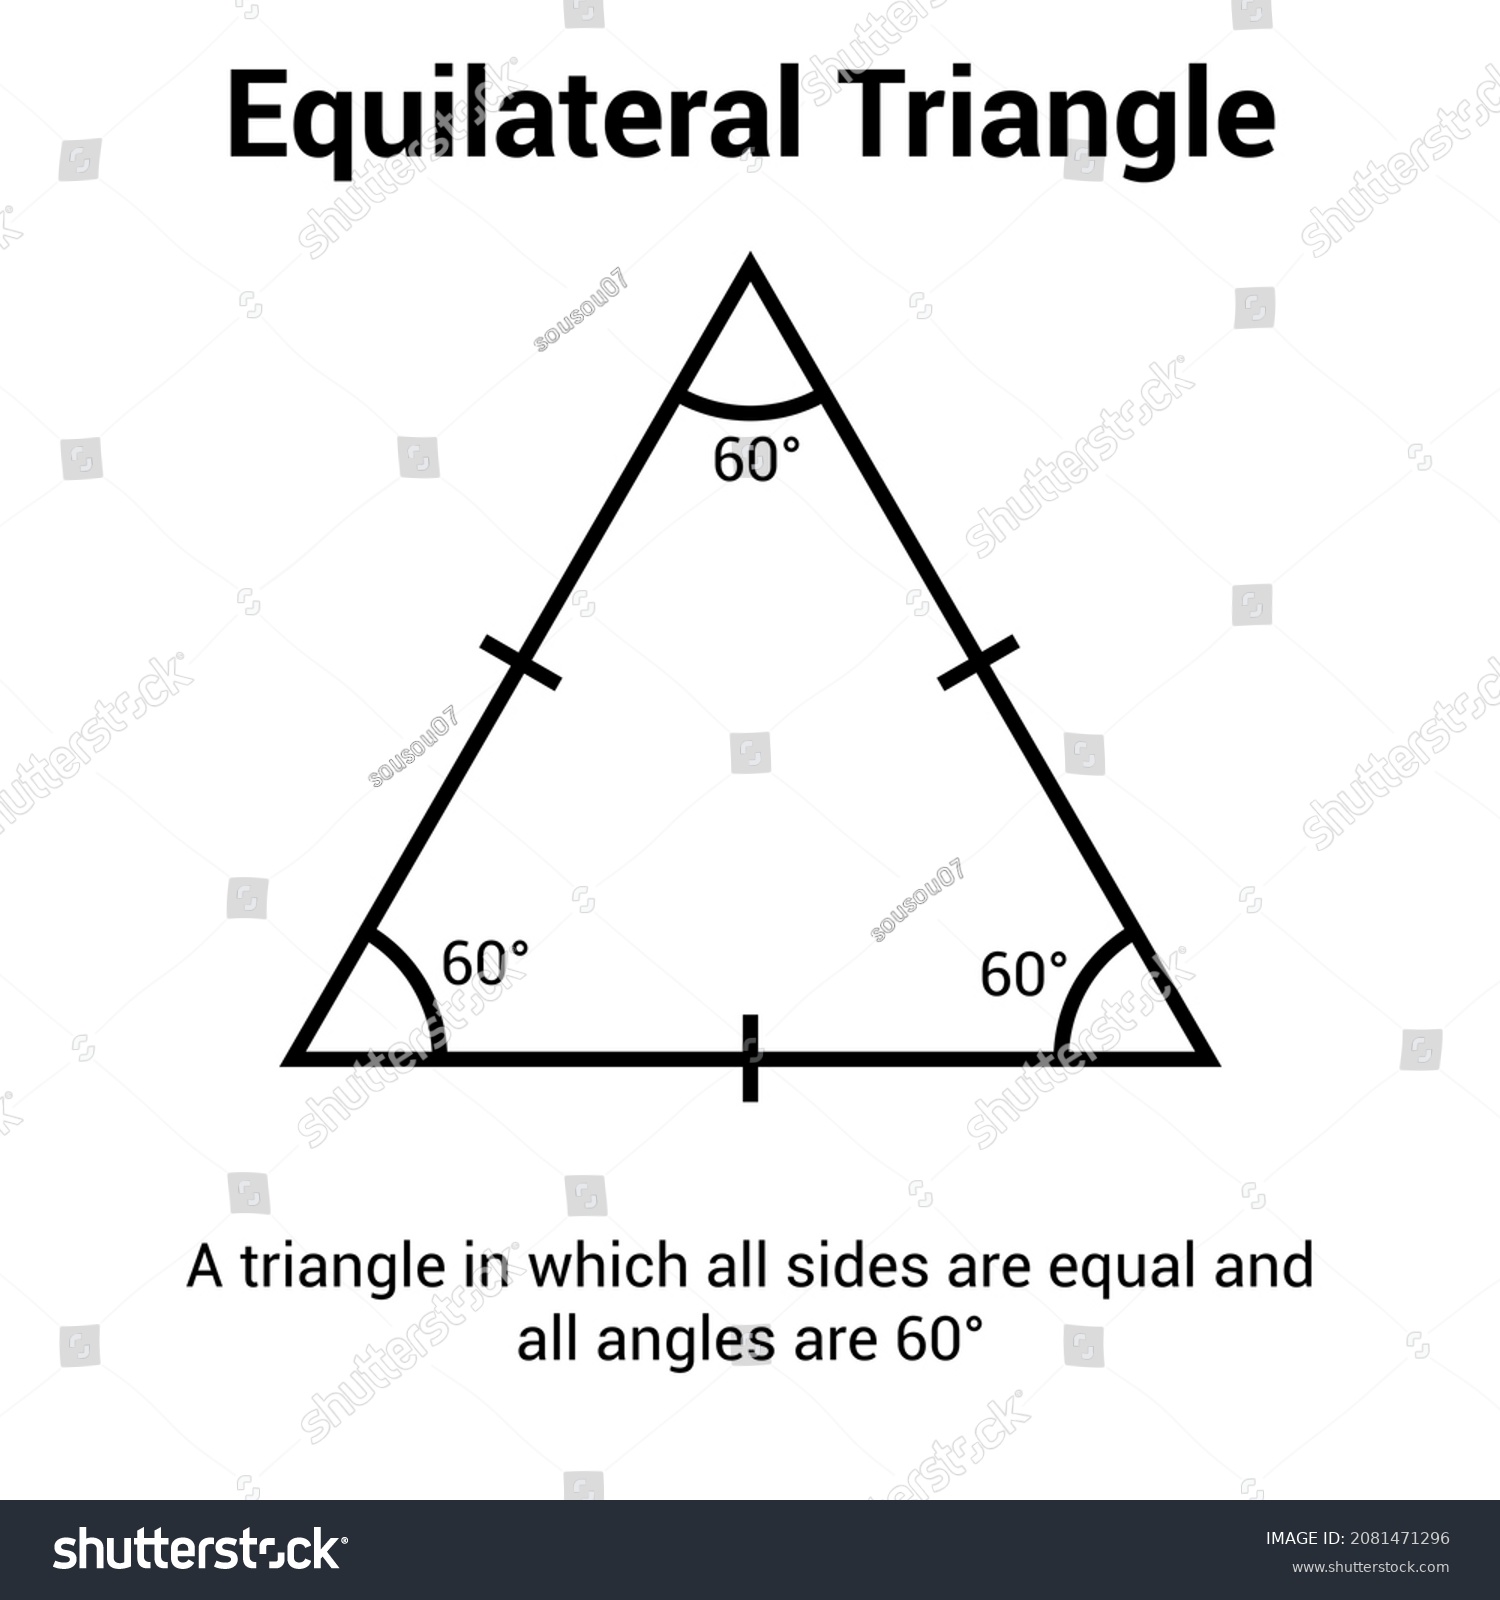 Types Triangle Mathematics Equilateral Triangle Stock Vector Royalty Free 2081471296 5686